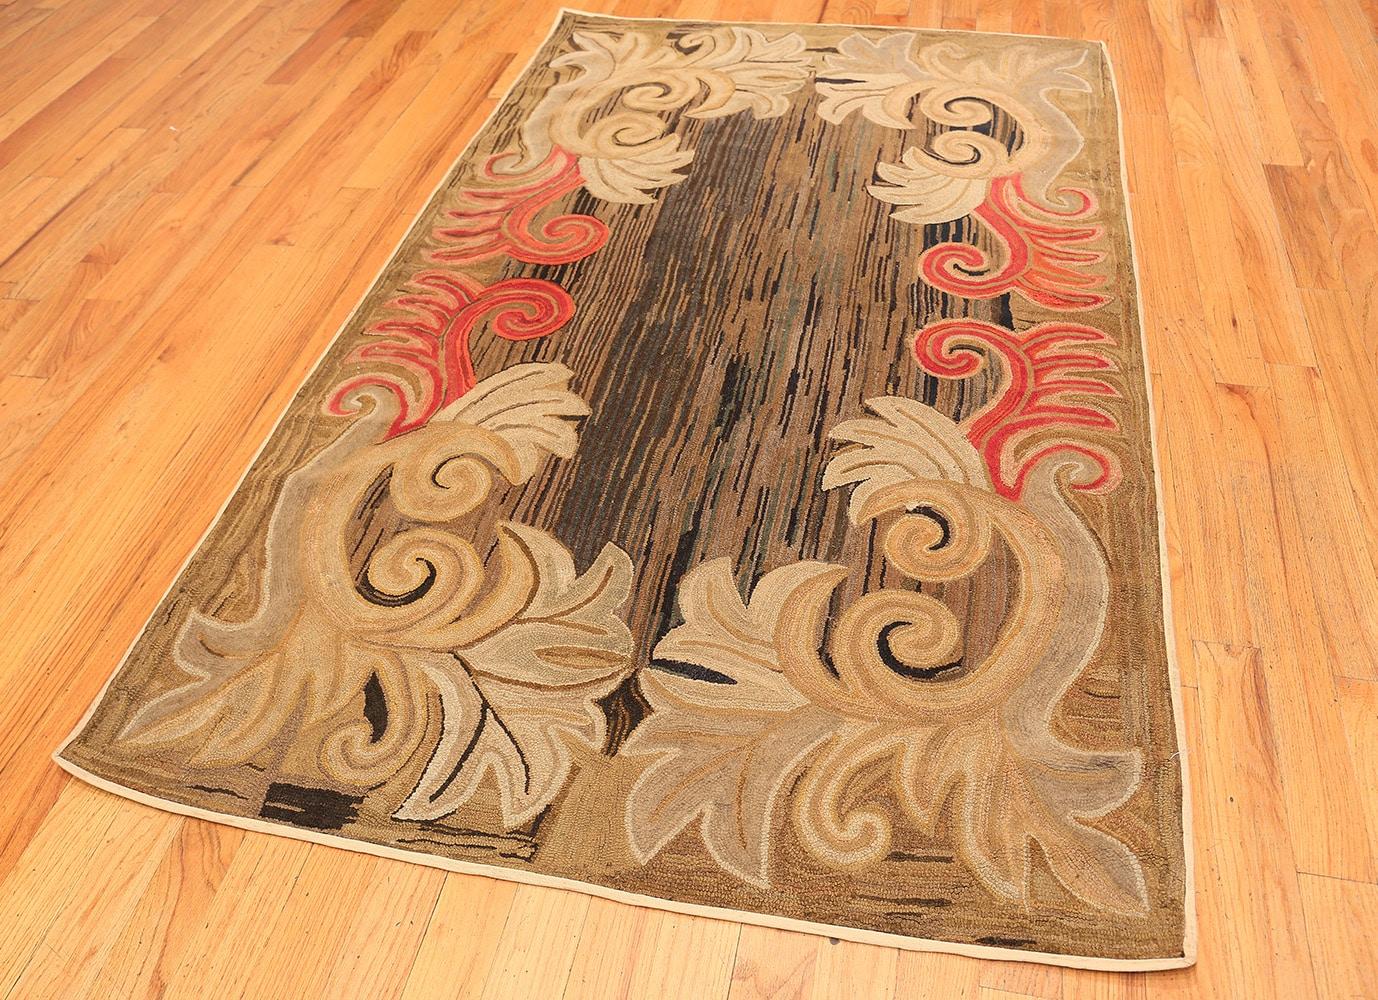 20th Century Antique Folk Art American Hooked Rug. Size: 4 ft 7 in x 7 ft 5 in